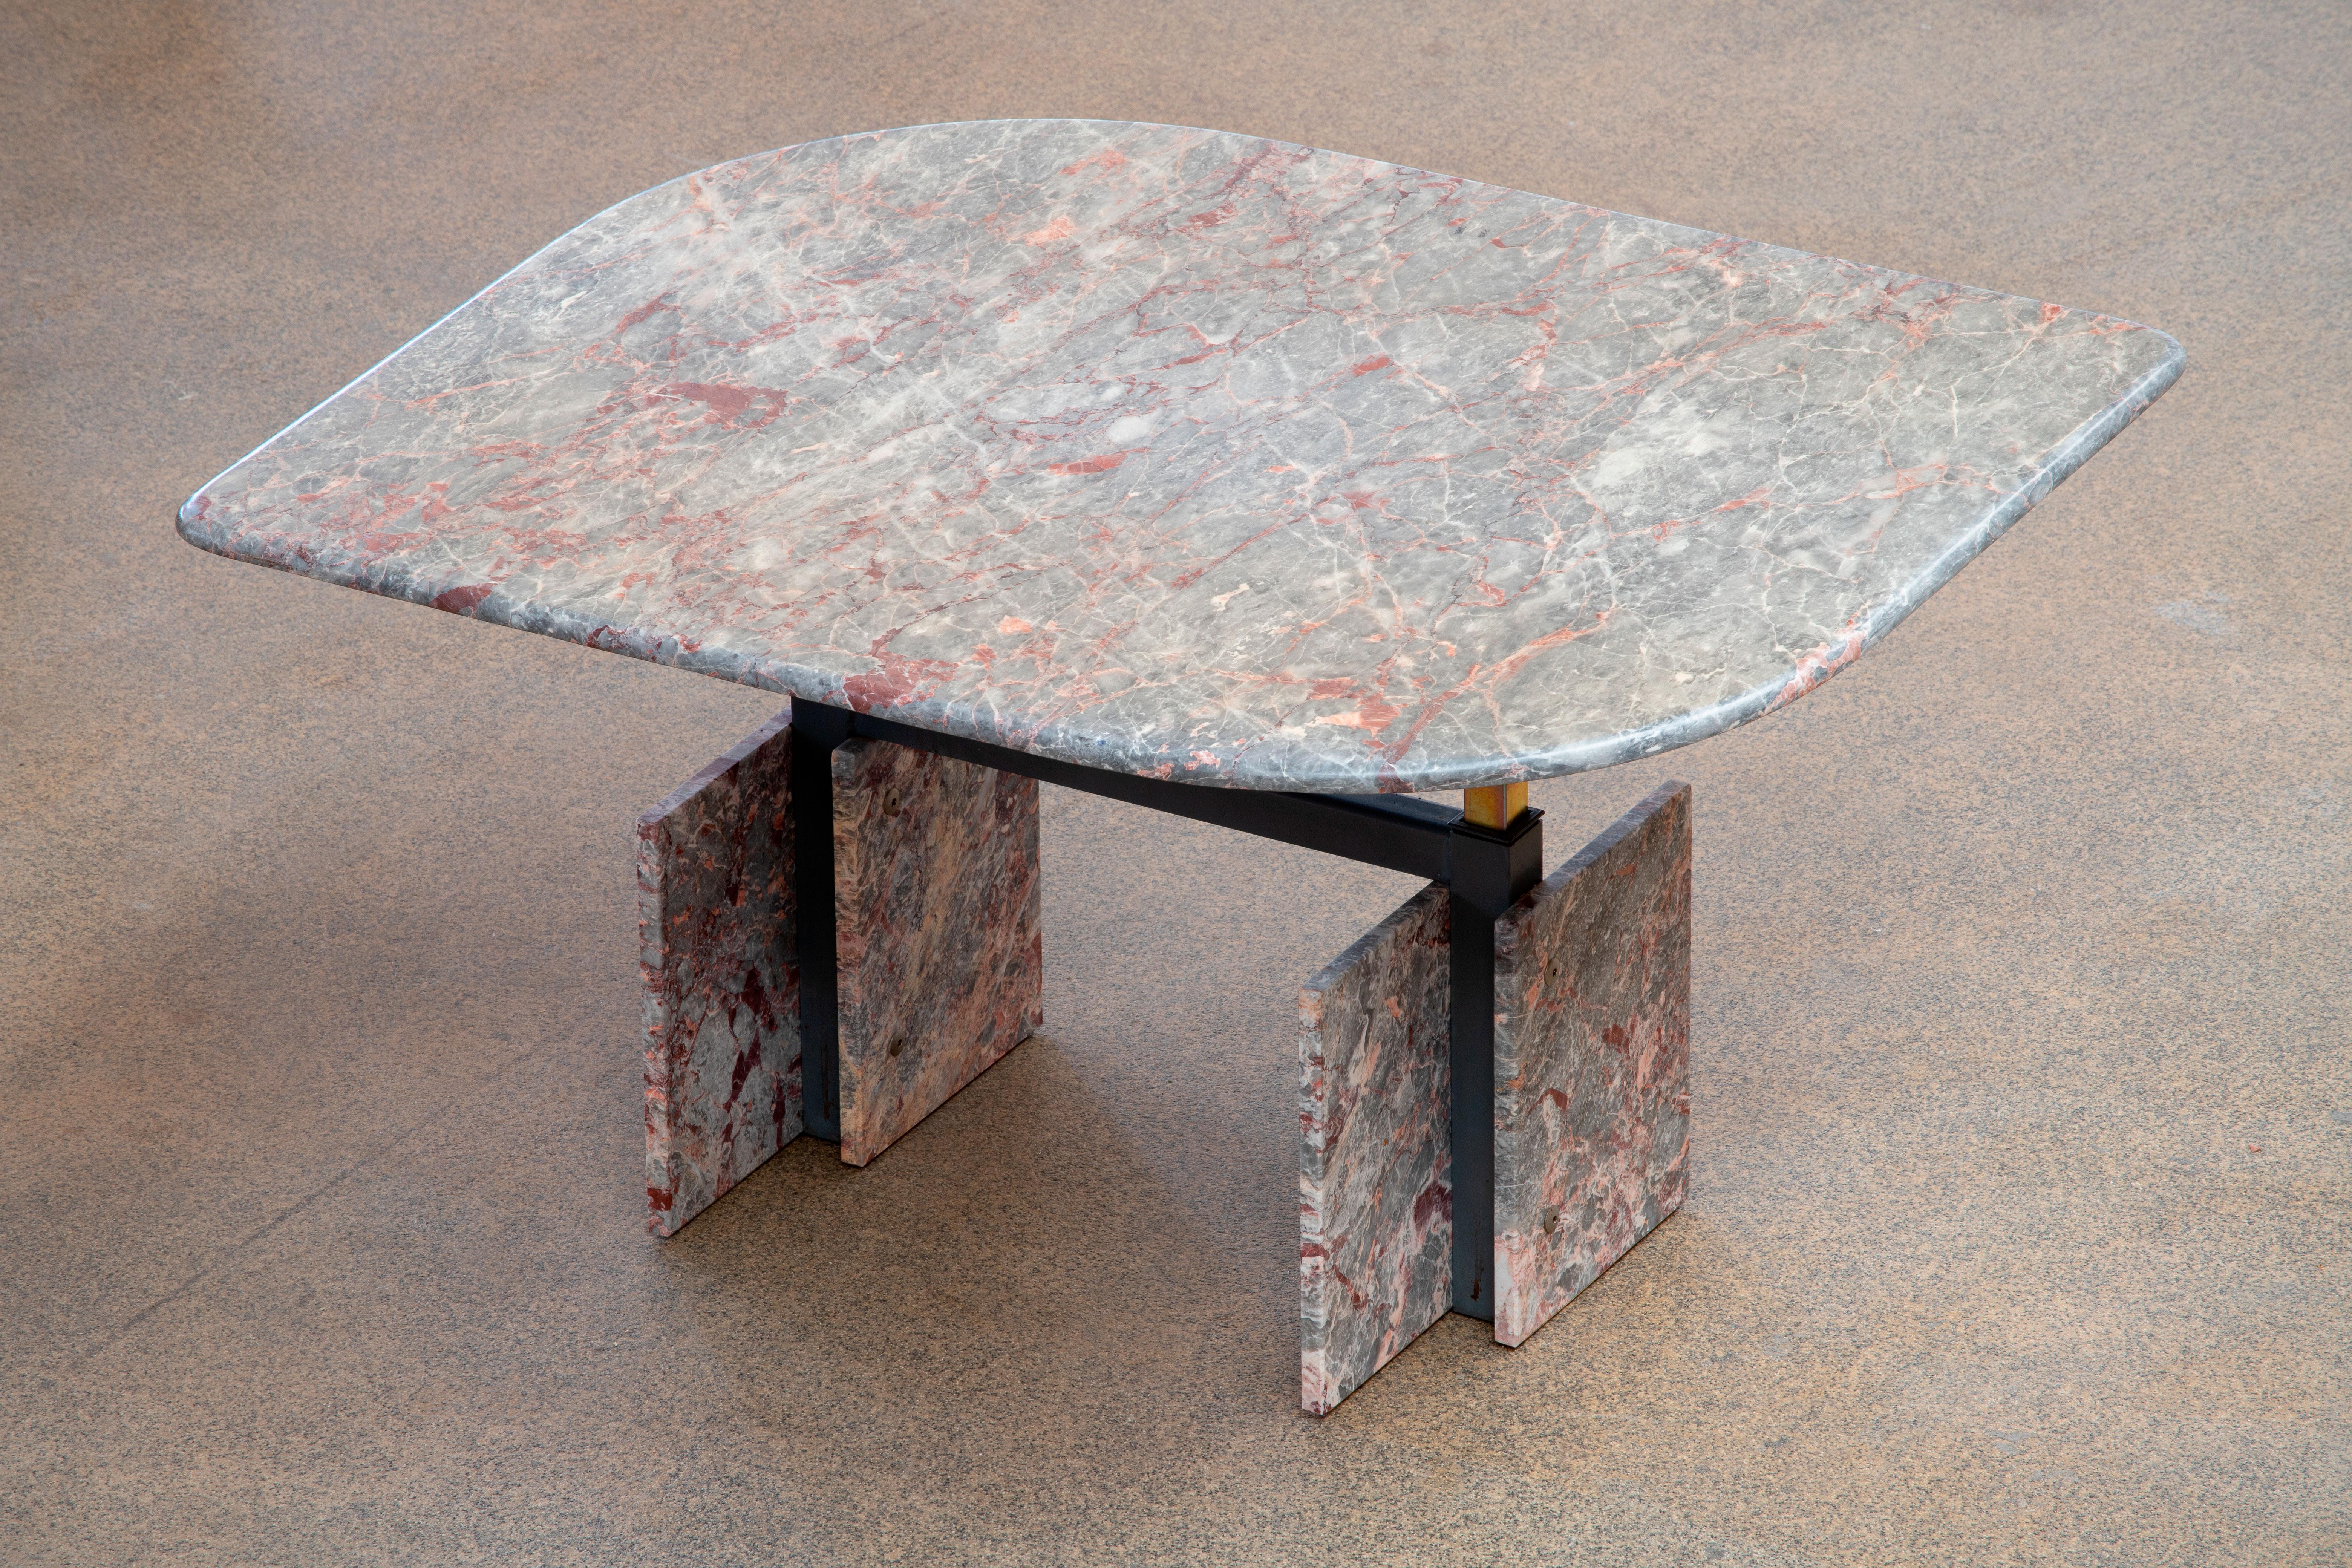 Beautiful grey, beige and pink marble table.

The heavy eye-shaped heightenable top rests on four marble blocks with a metal structure between.